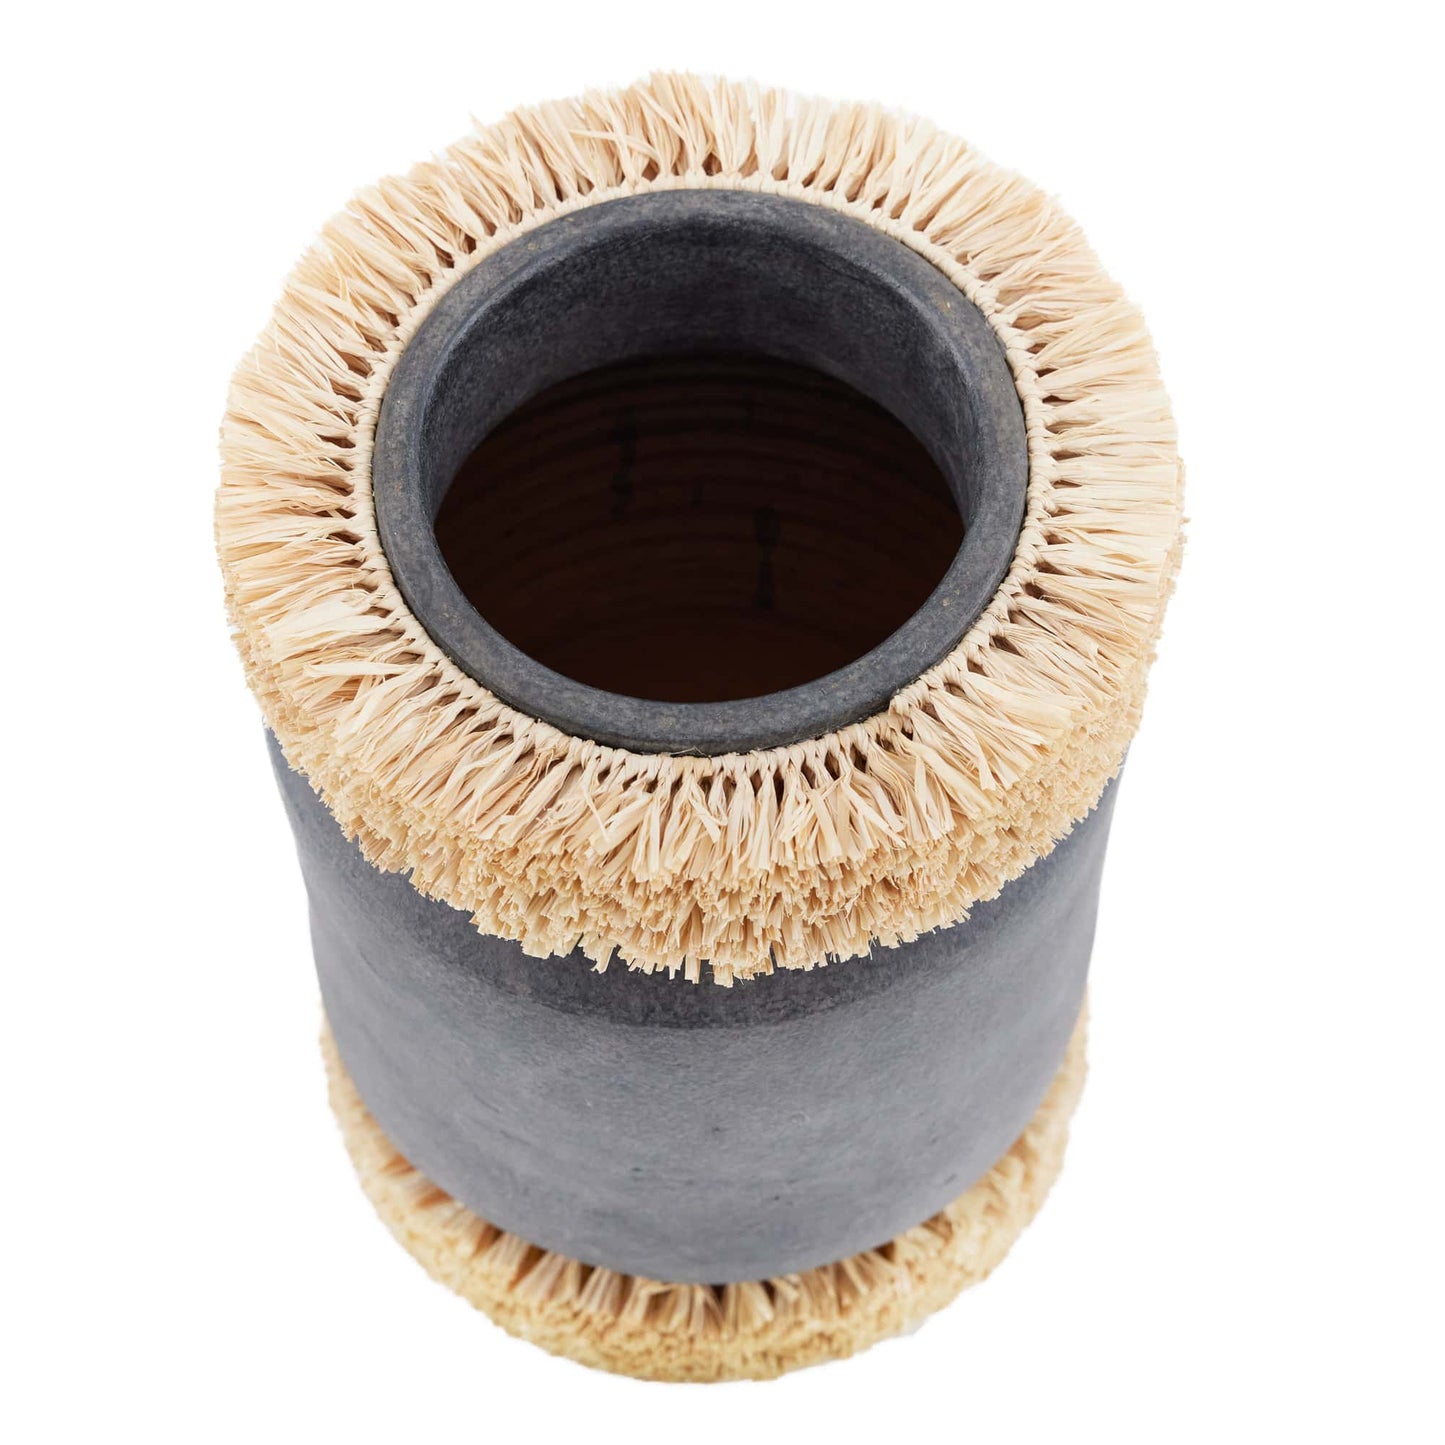 Handmade Matte Charcoal Terracotta Raffie Vase - Textural Thatched Roofing Inspiration